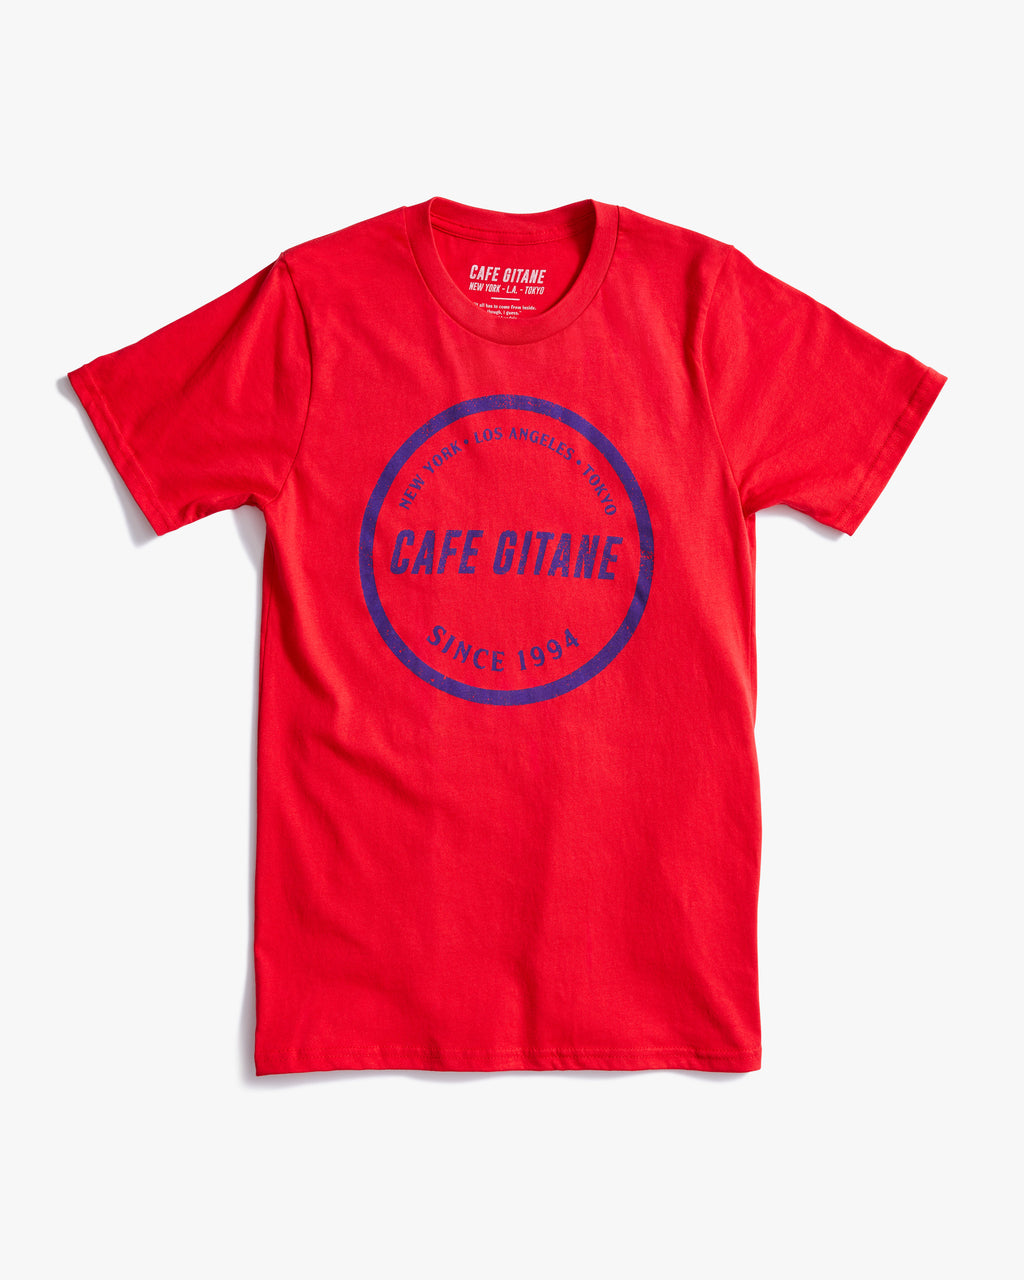 The Cafe Gitane Stamped Logo Tee is 100% organic cotton and made in the USA. The classic t-shirt in red and printed with a royal blue logo in a stamped structure, with non-toxic ink. The print ins circular in the middle of the front chest. The logo features each city Cafe Gitane has a location in: New York, Los Angeles, and Tokyo, as well as when the first location opened: 1994. 